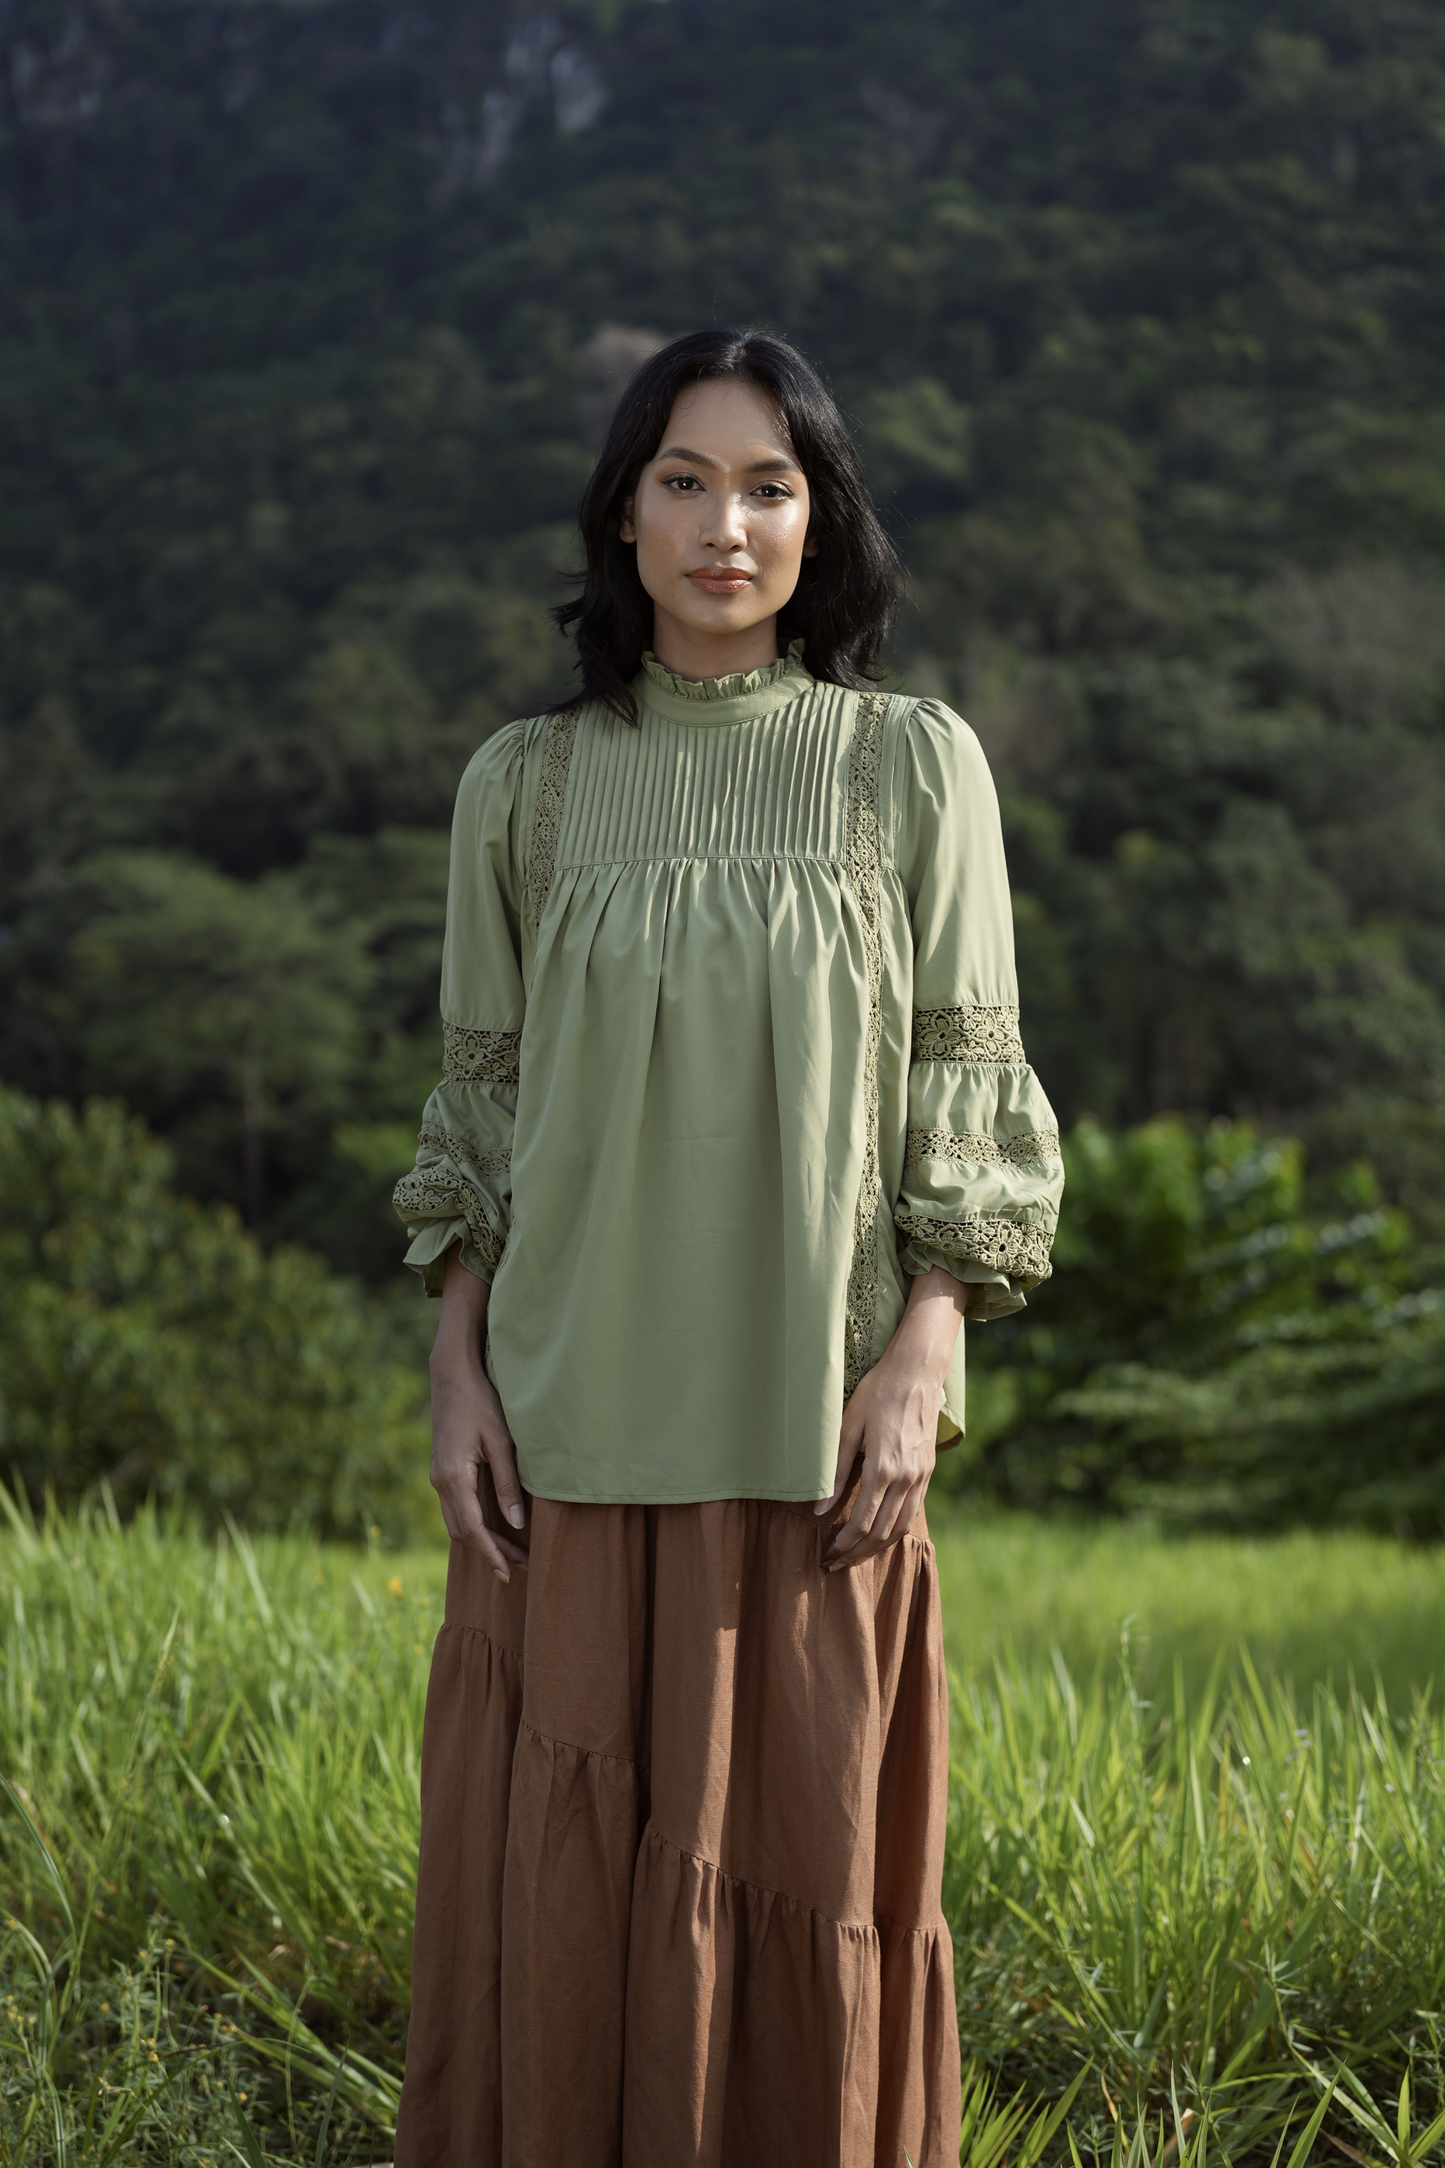 Paying homage to our Solange Kurung which made a debut this Eid - the Sonya Top is rendered in a hunter green, 100% soft and ultra lightweight fabric that features intricate pin-tucks at the bodice, floral inset lace detailing streaming down the bodice and at the puffed, bracelet-length sleeves.